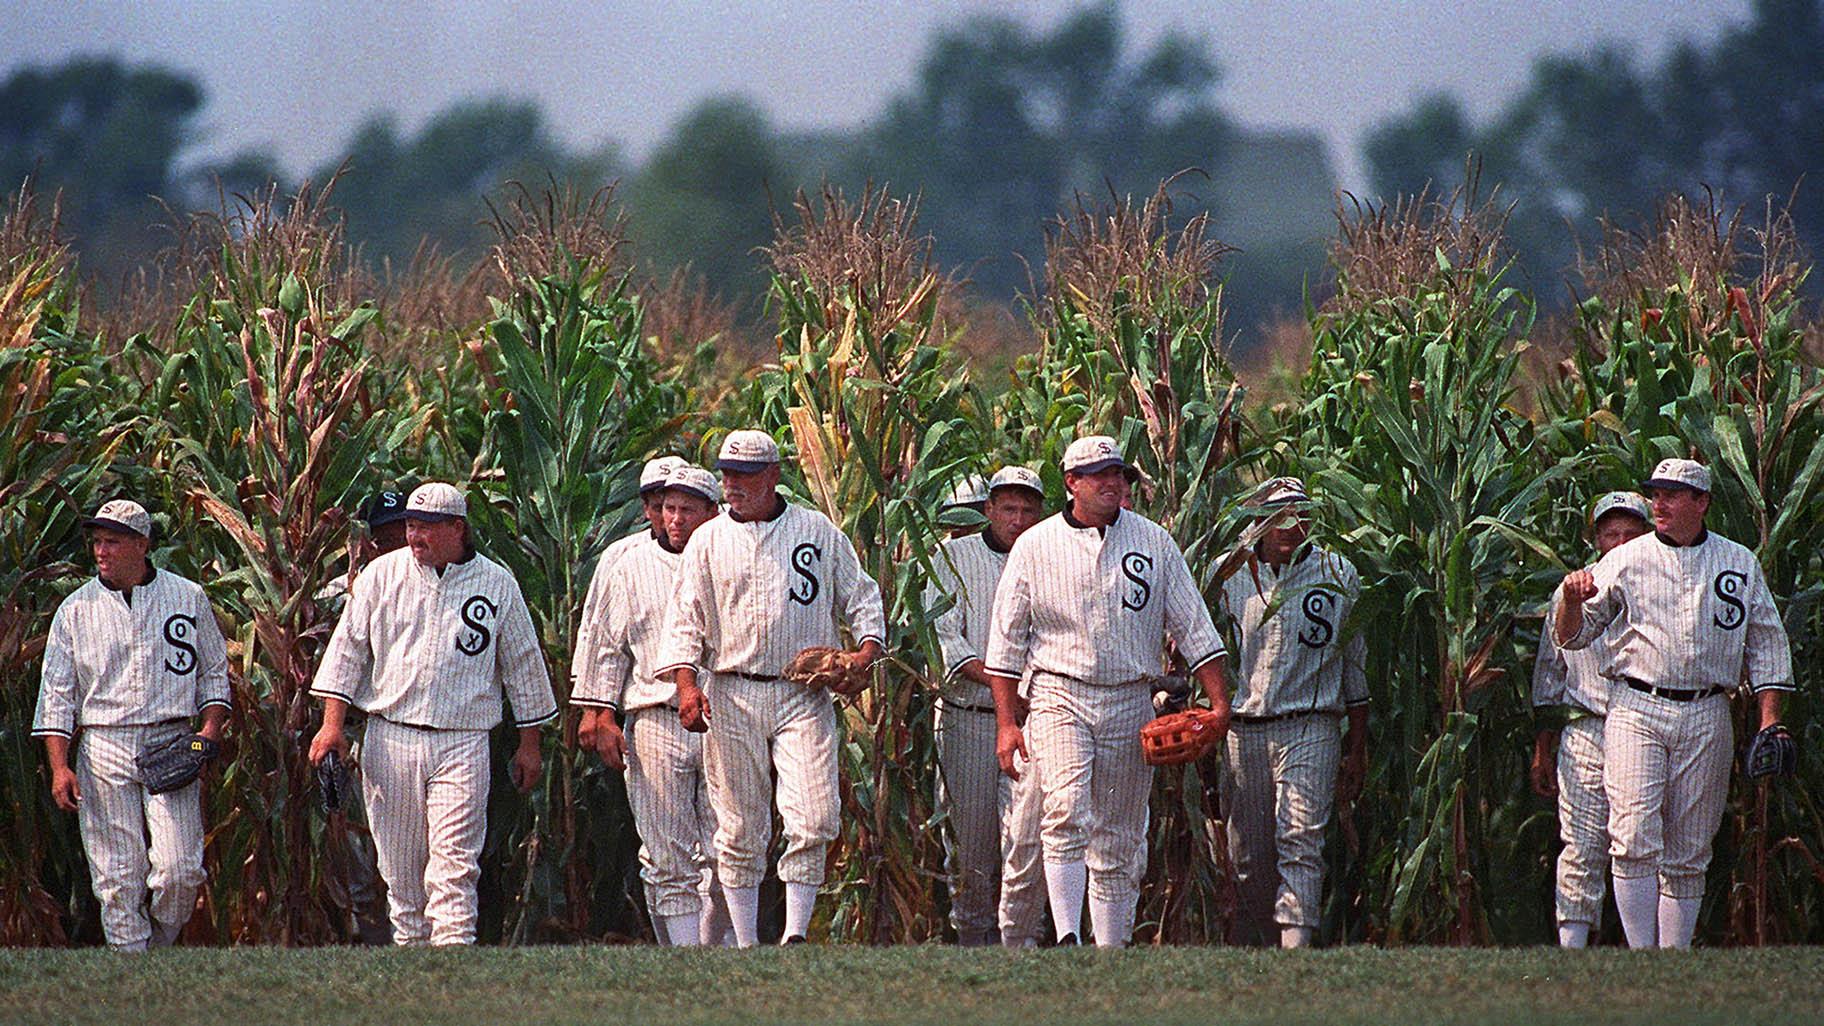 In this July 22, 1977, file photo, people portraying ghost players emerge from a cornfield as they reenact a scene from the movie “Field of Dreams” at the movie site in Dyersville, Iowa.  (AP Photo / Charlie Neibergall, File)